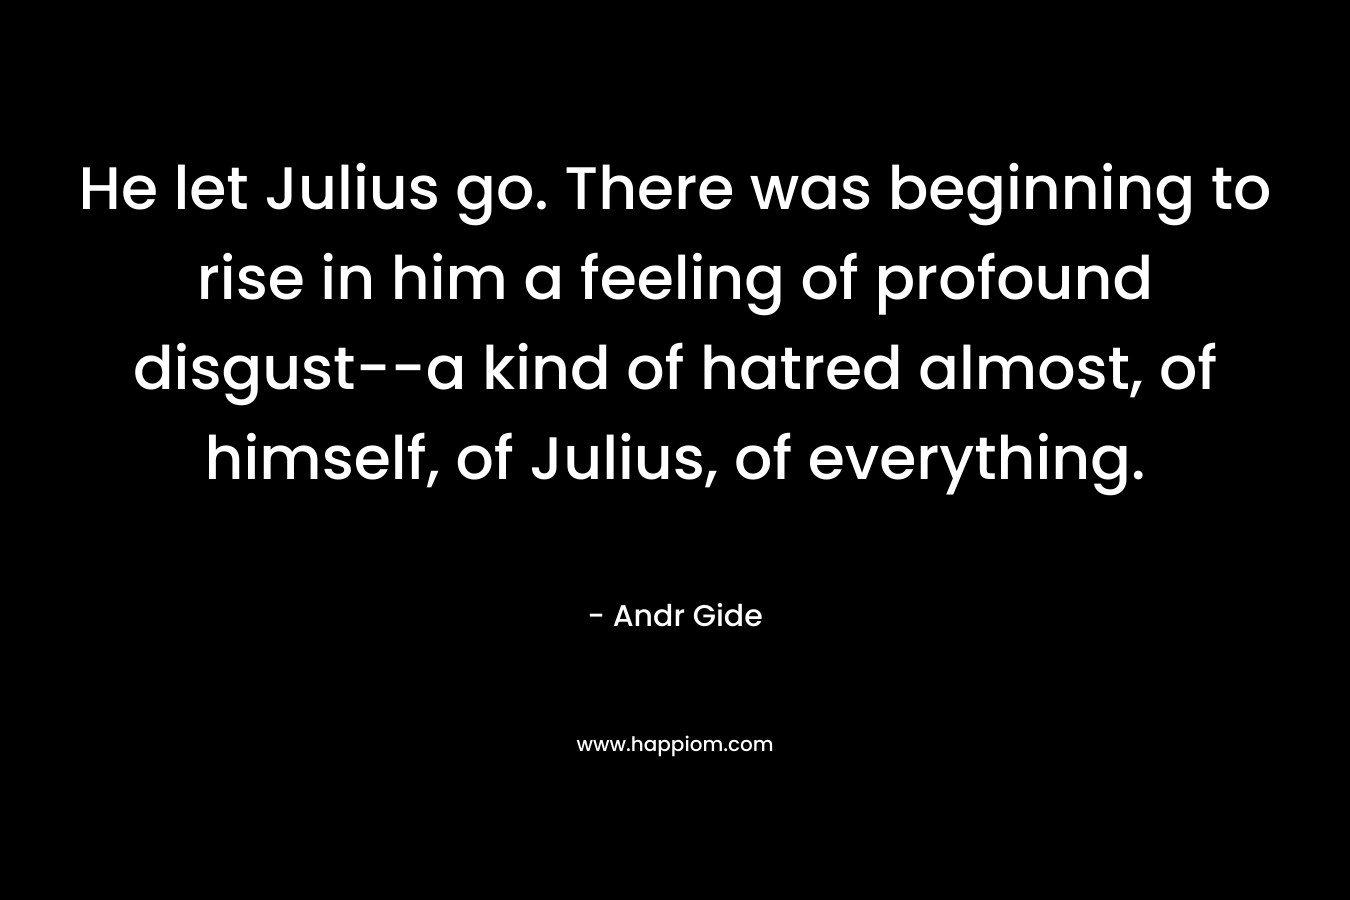 He let Julius go. There was beginning to rise in him a feeling of profound disgust–a kind of hatred almost, of himself, of Julius, of everything. – Andr Gide